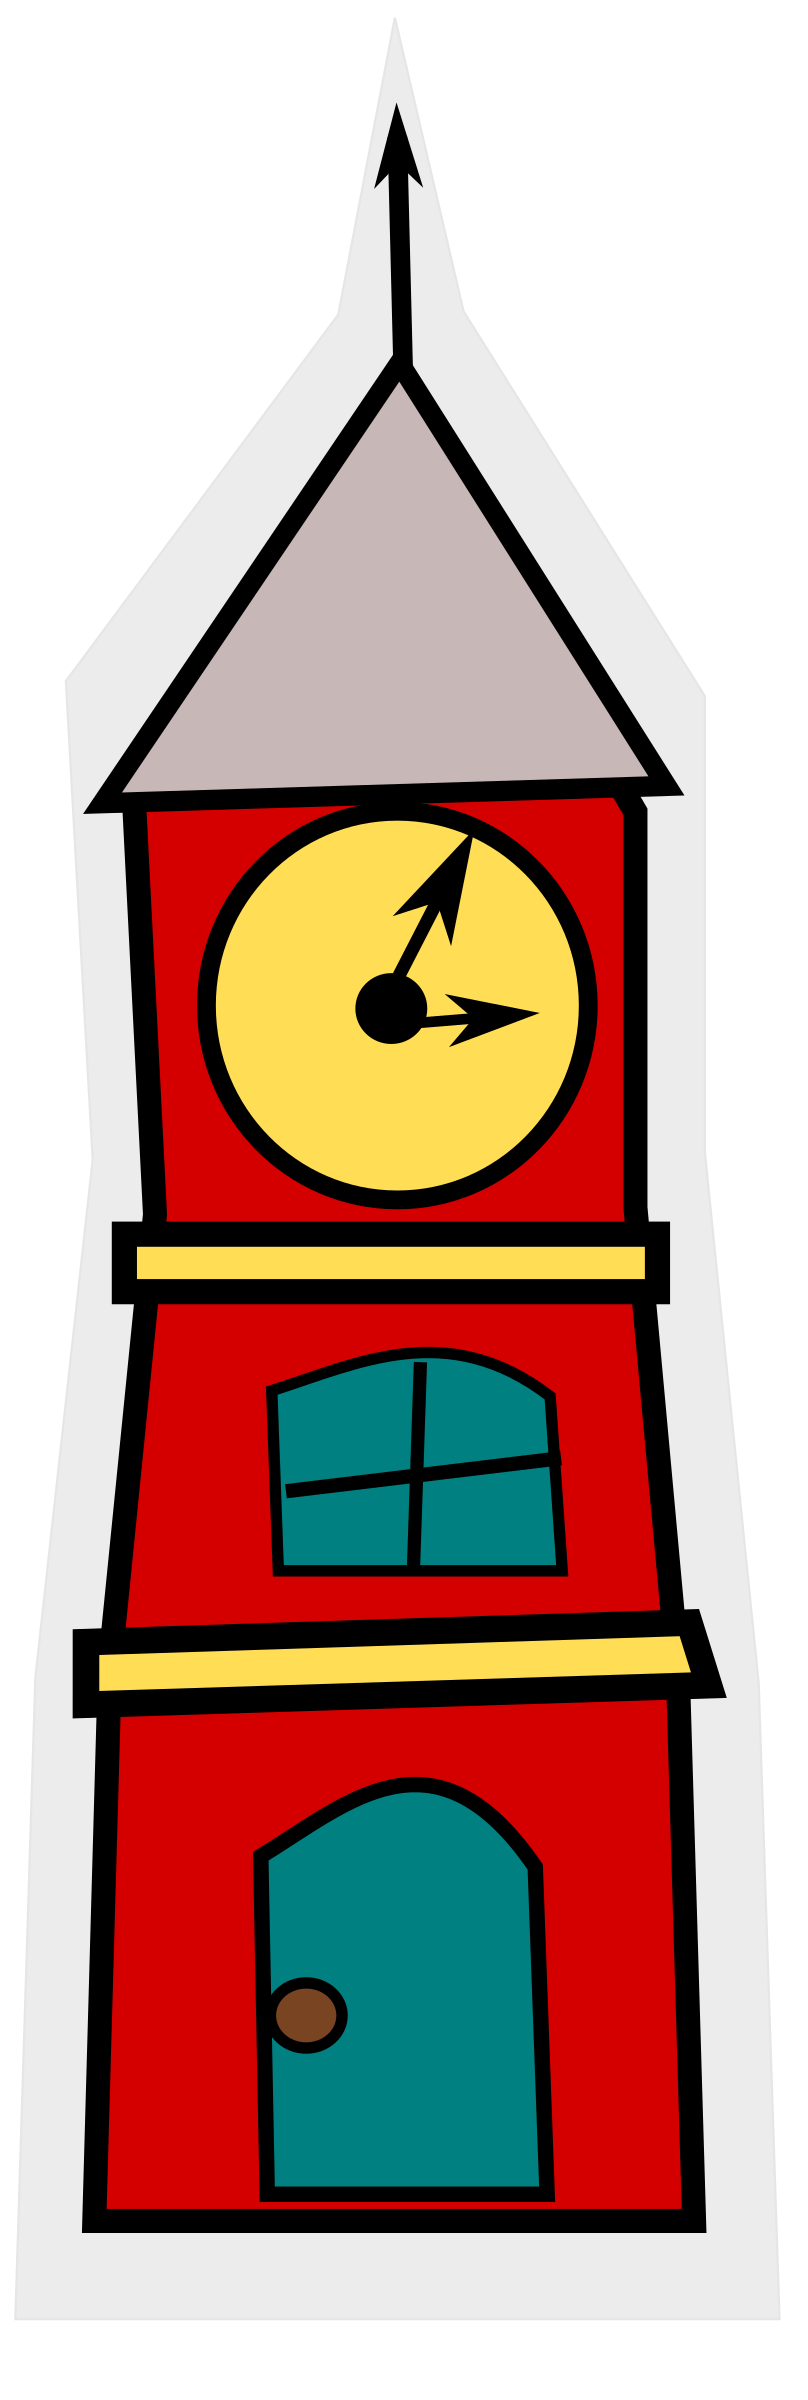 Tower clock clipart